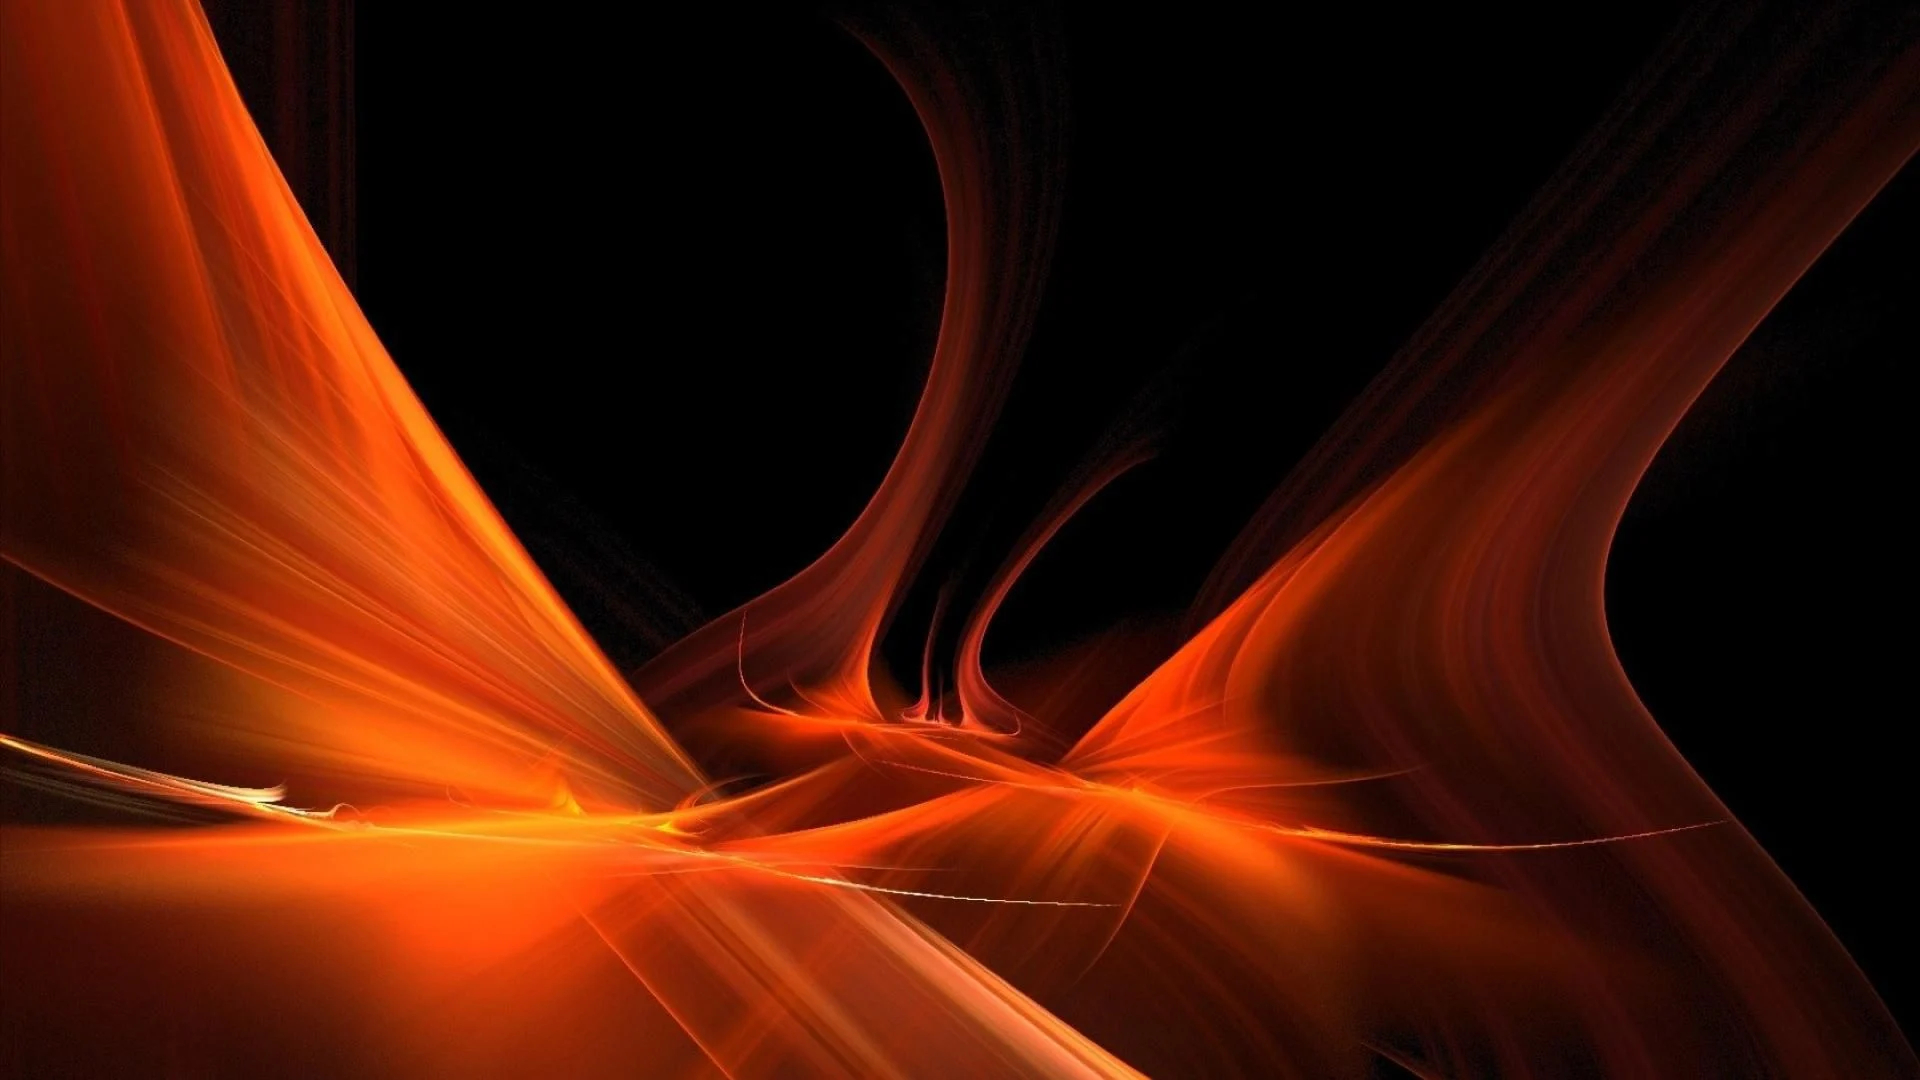 1920x1080 Black and Orange Abstract Wallpapers Top Free Black and Orange Abstract Backgrounds